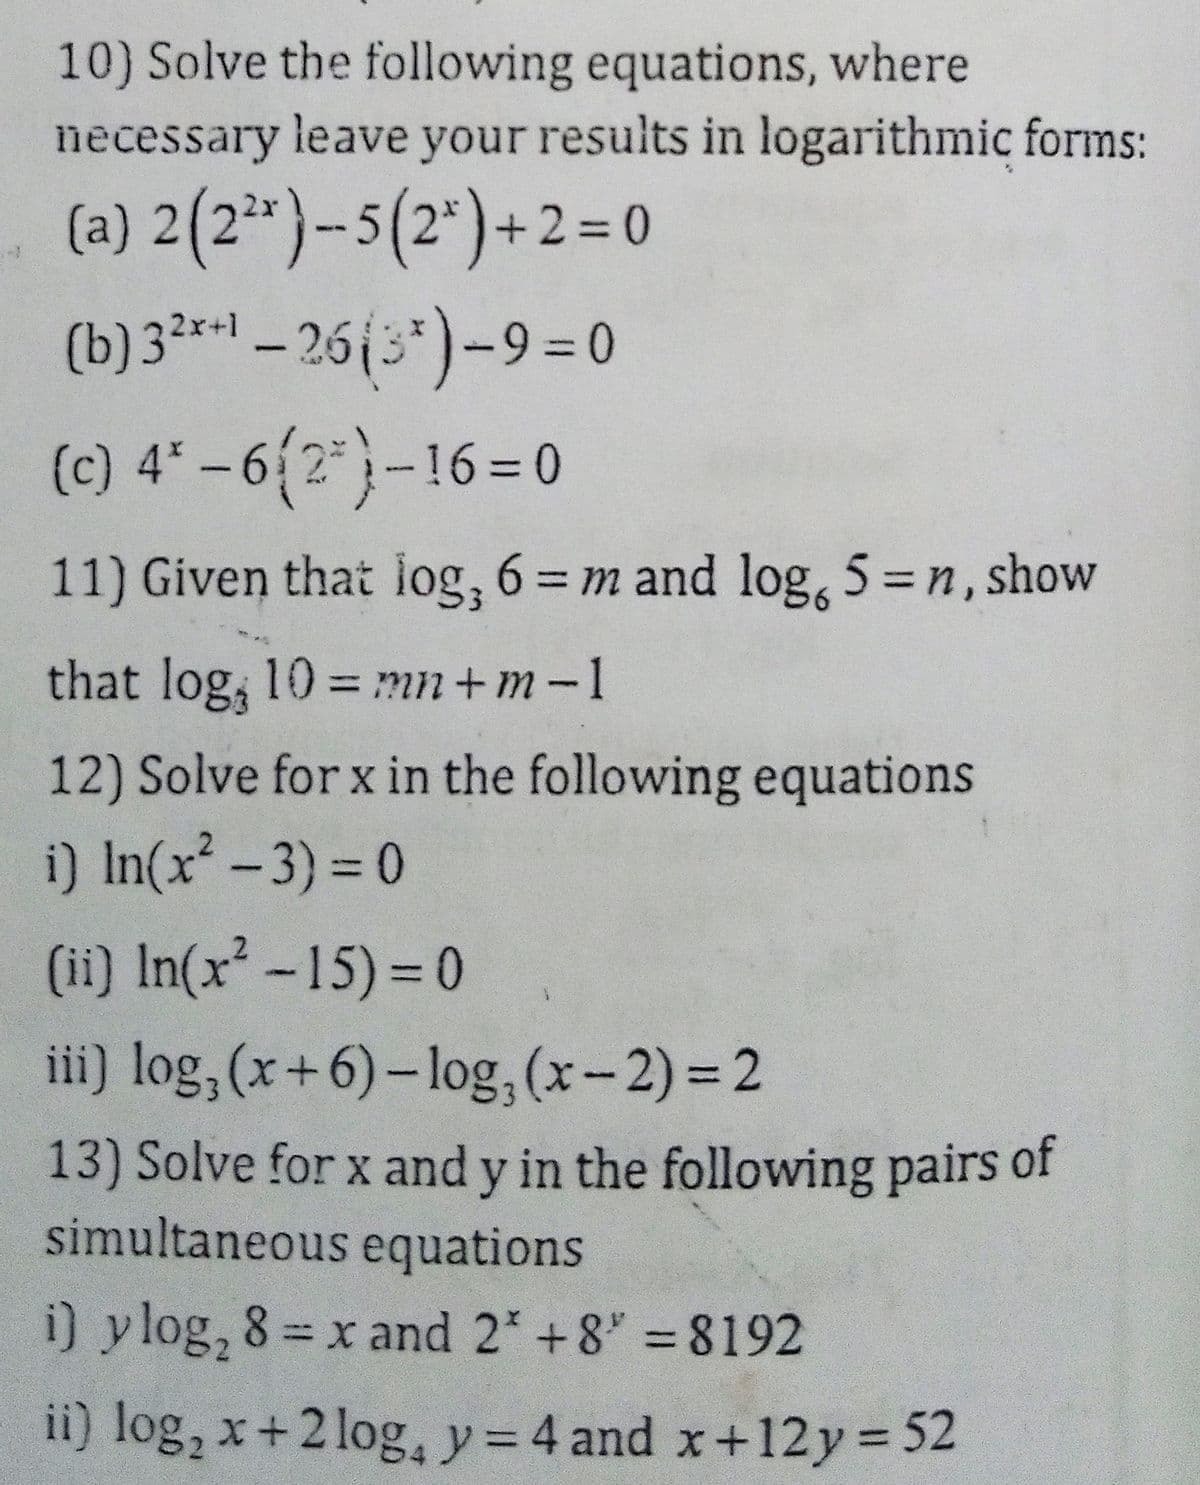 10) Solve the following equations, where
necessary leave your results in logarithmic forms:
(a) 2(2*}-5(2*)+2= 0
(b) 3** – 26{3*)-9 = 0
(c) 4* –6{2*}-16=0
11) Given that log, 6= m and log, 5 =n, show
that log, 10 = mn+m-1
%3D
12) Solve for x in the following equations
i) In(x-3) = 0
%3D
(ii) In(x -15) = 0
iii) log, (x+6)- log, (x-2) = 2
13) Solve for x and y in the following pairs of
simultaneous equations
i) ylog, 8= x and 2* +8" 8192
%3D
ii) log, x+2 log, y= 4 and x+12y 52
